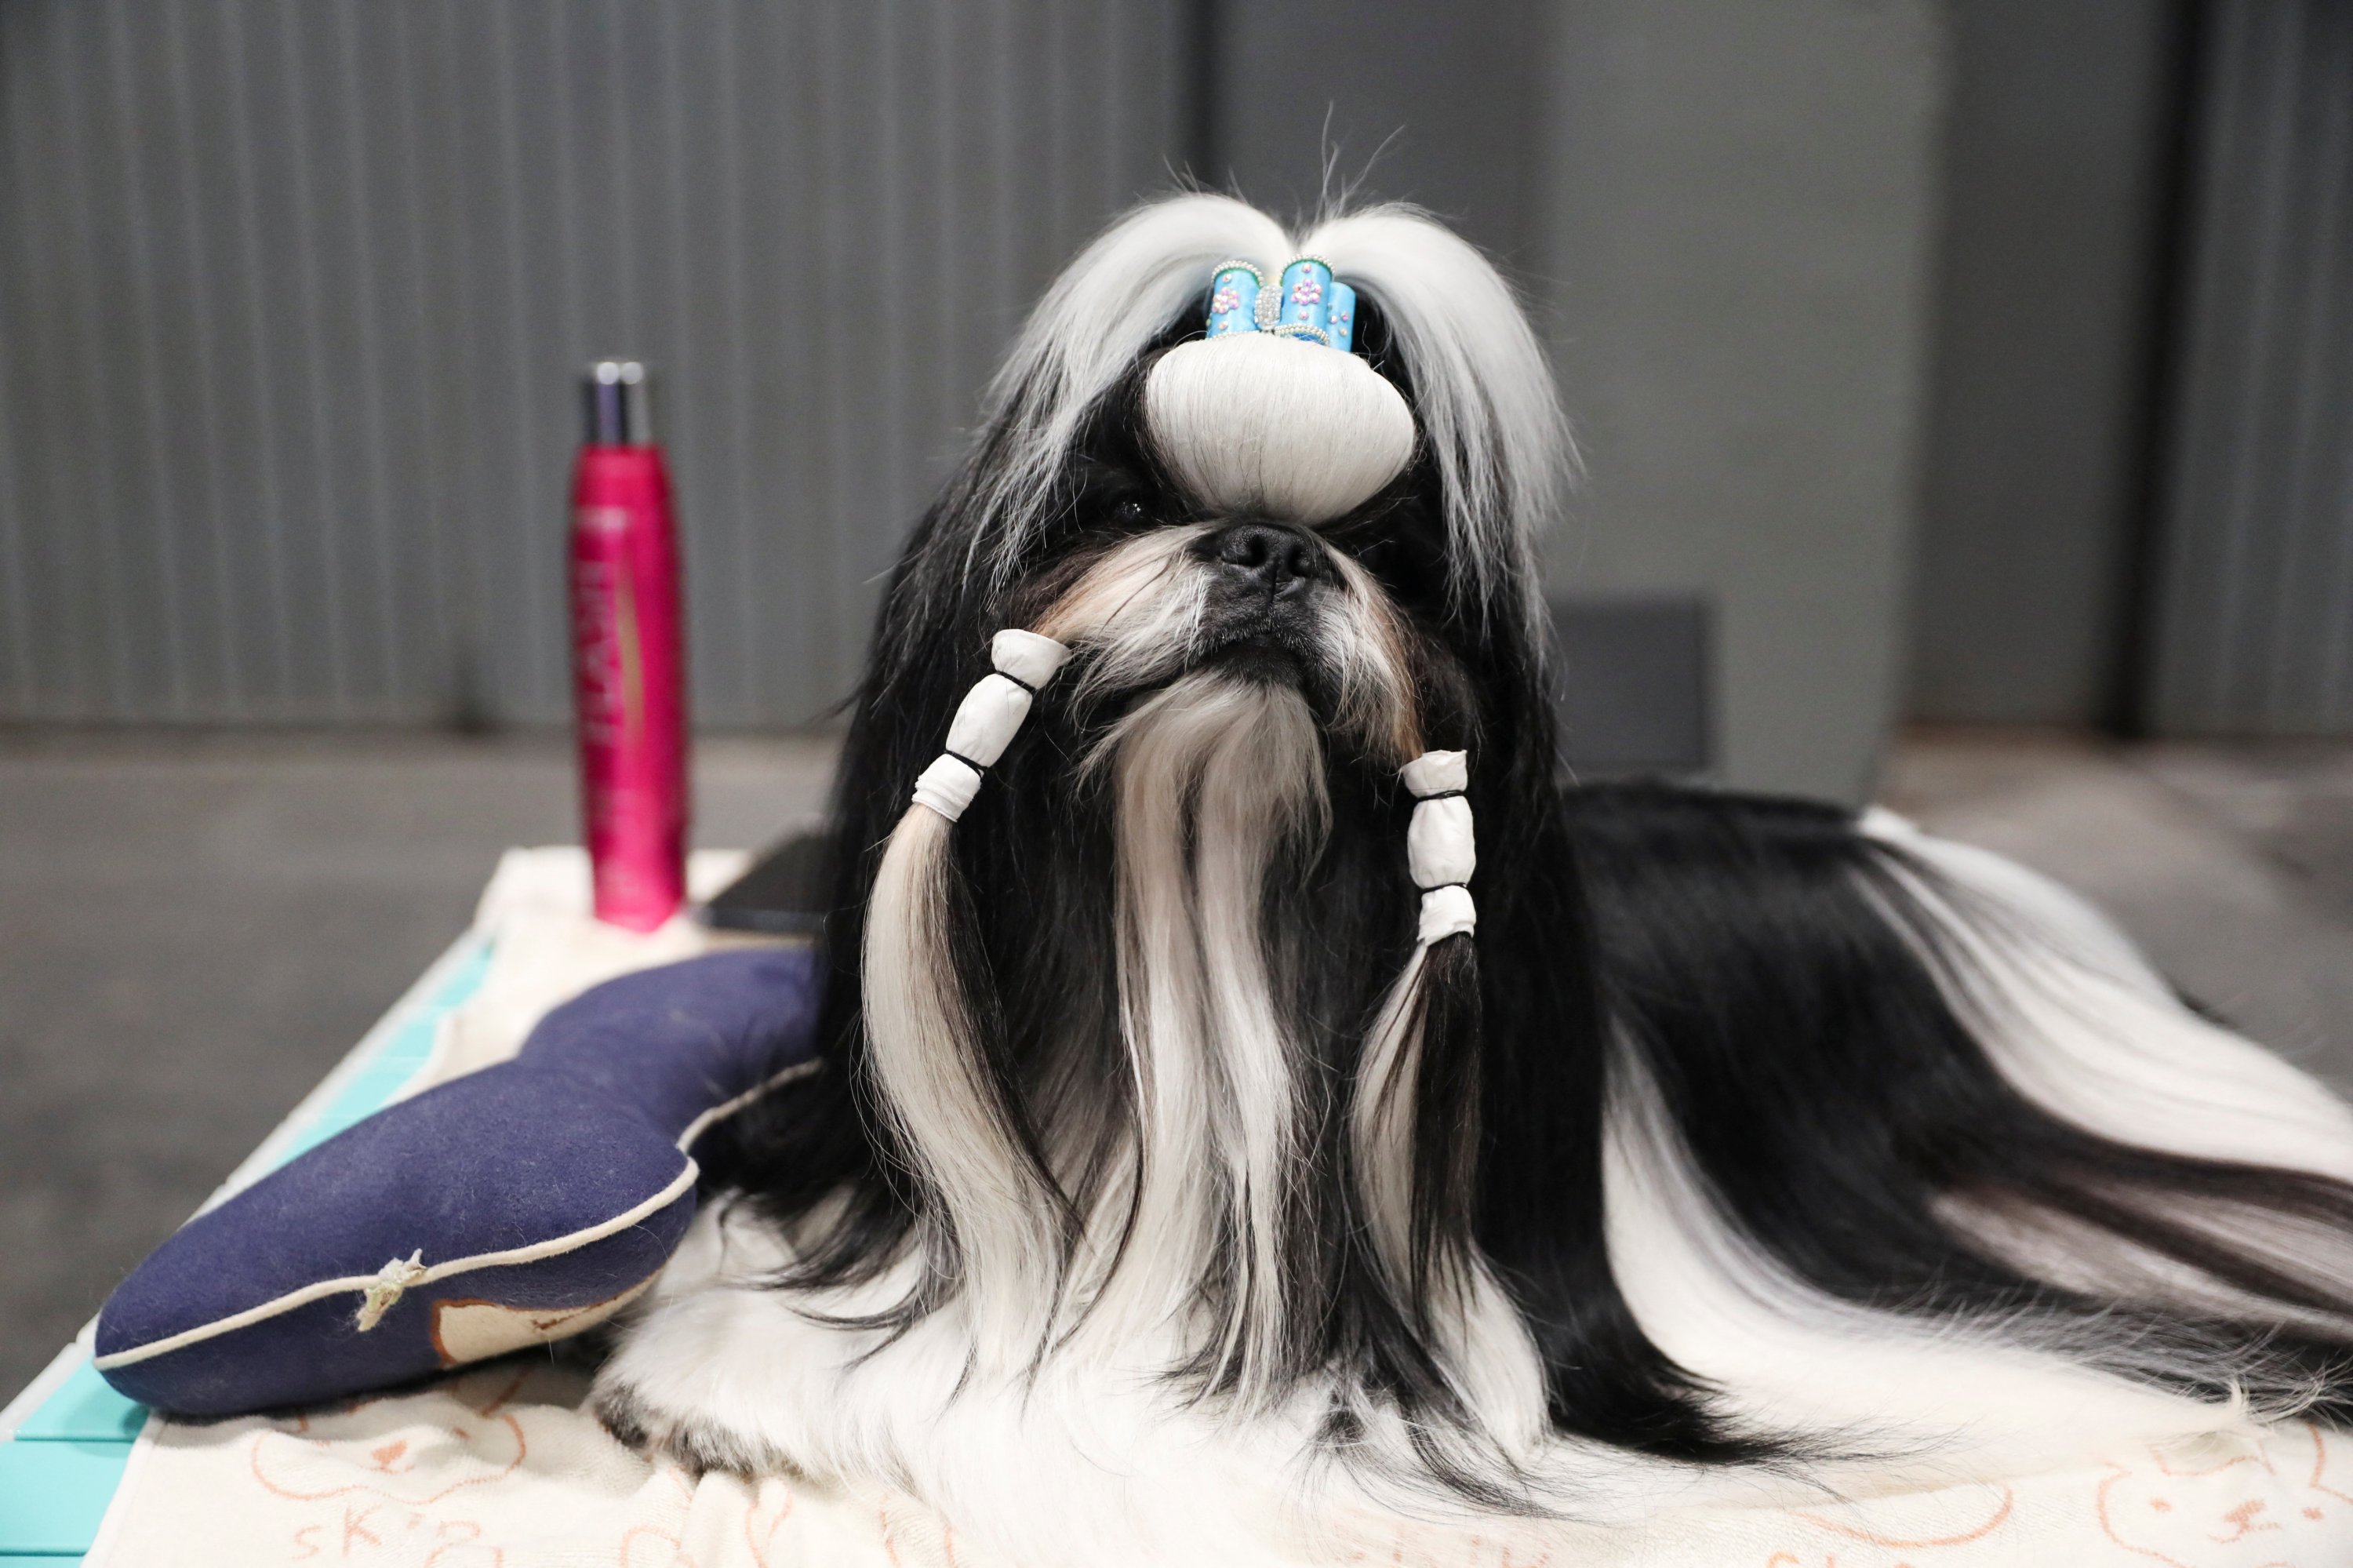 A Shih Tzu rests at a grooming table at the 2022 World Dog Show, where more than 15,000 dogs from all around the globe are expected to attend, at the IFEMA conference center in Madrid, Spain, June 23, 2022. (Reuters Photo)